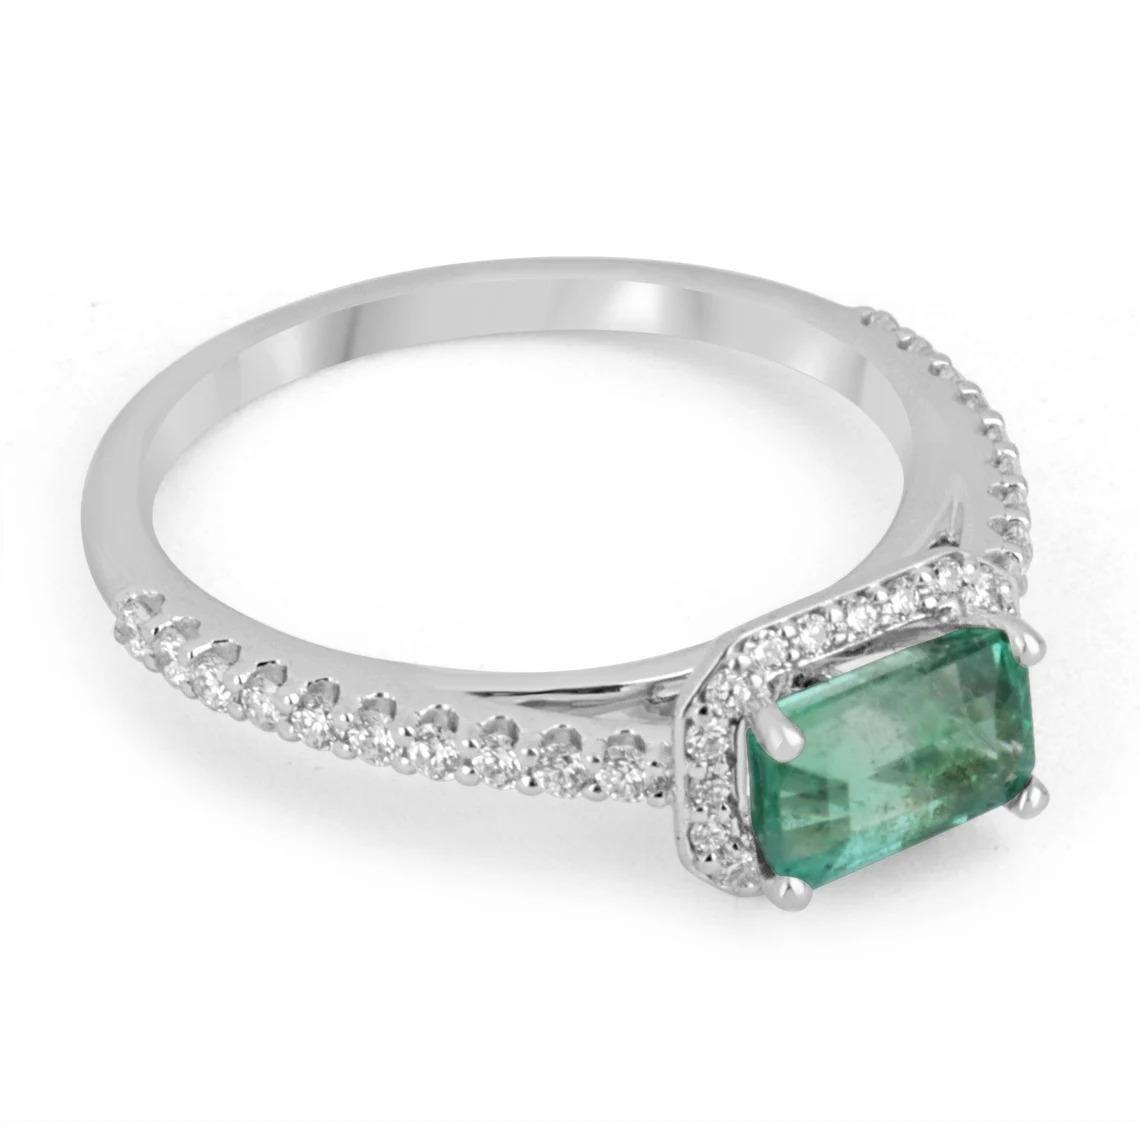 A stunning emerald and diamond engagement ring. The center gemstone features a 0.95-carat, natural Zambian emerald with great qualities. A medium green color, very good eye clarity and luster; set east to west. A diamond halo surrounds the gorgeous